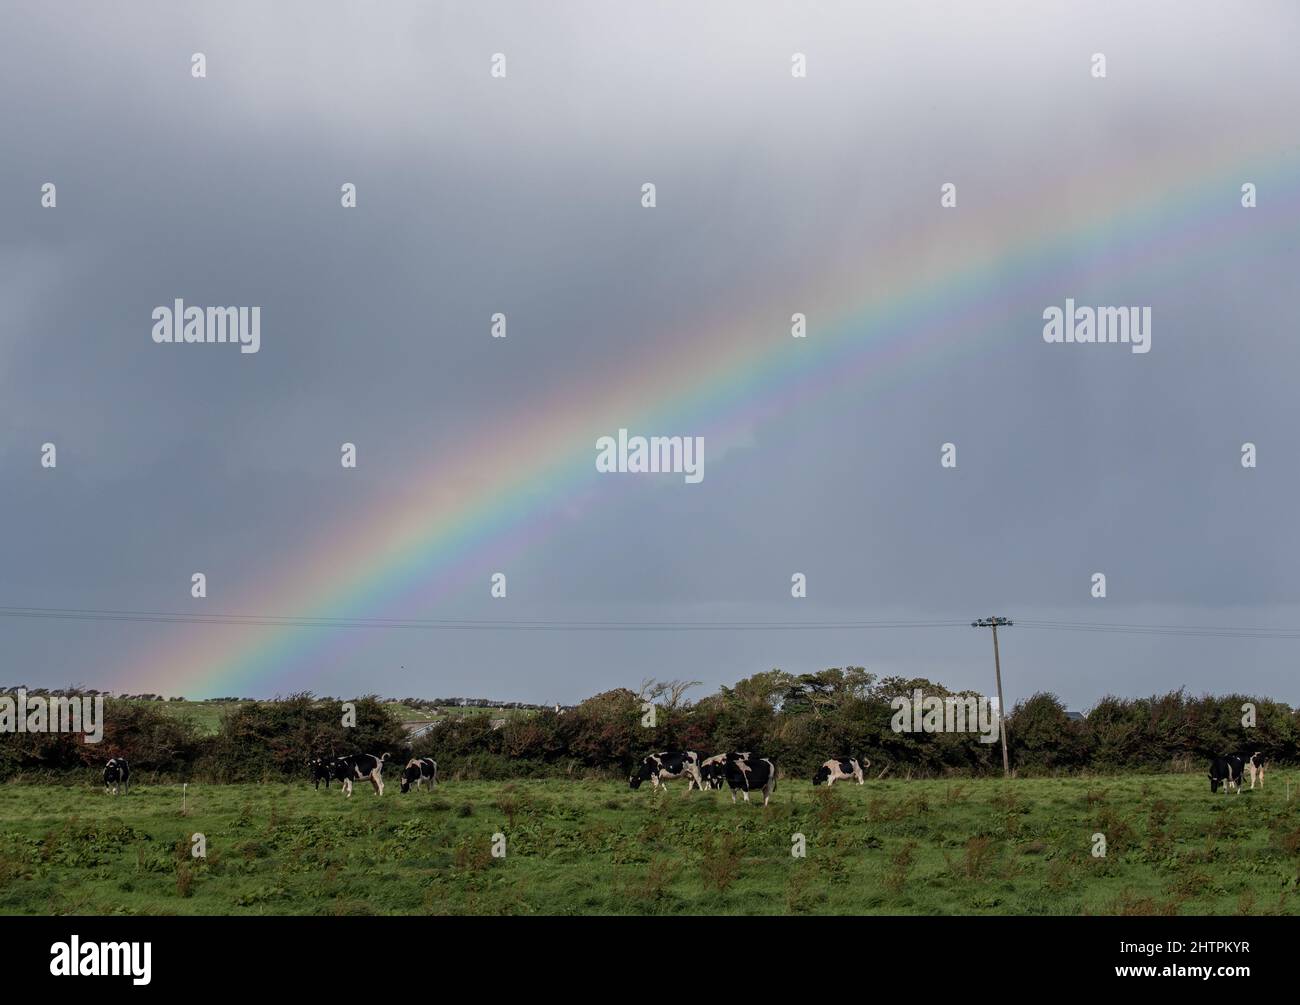 Rainbow over cows grazing in a grass field, rural Ireland landscape Stock Photo